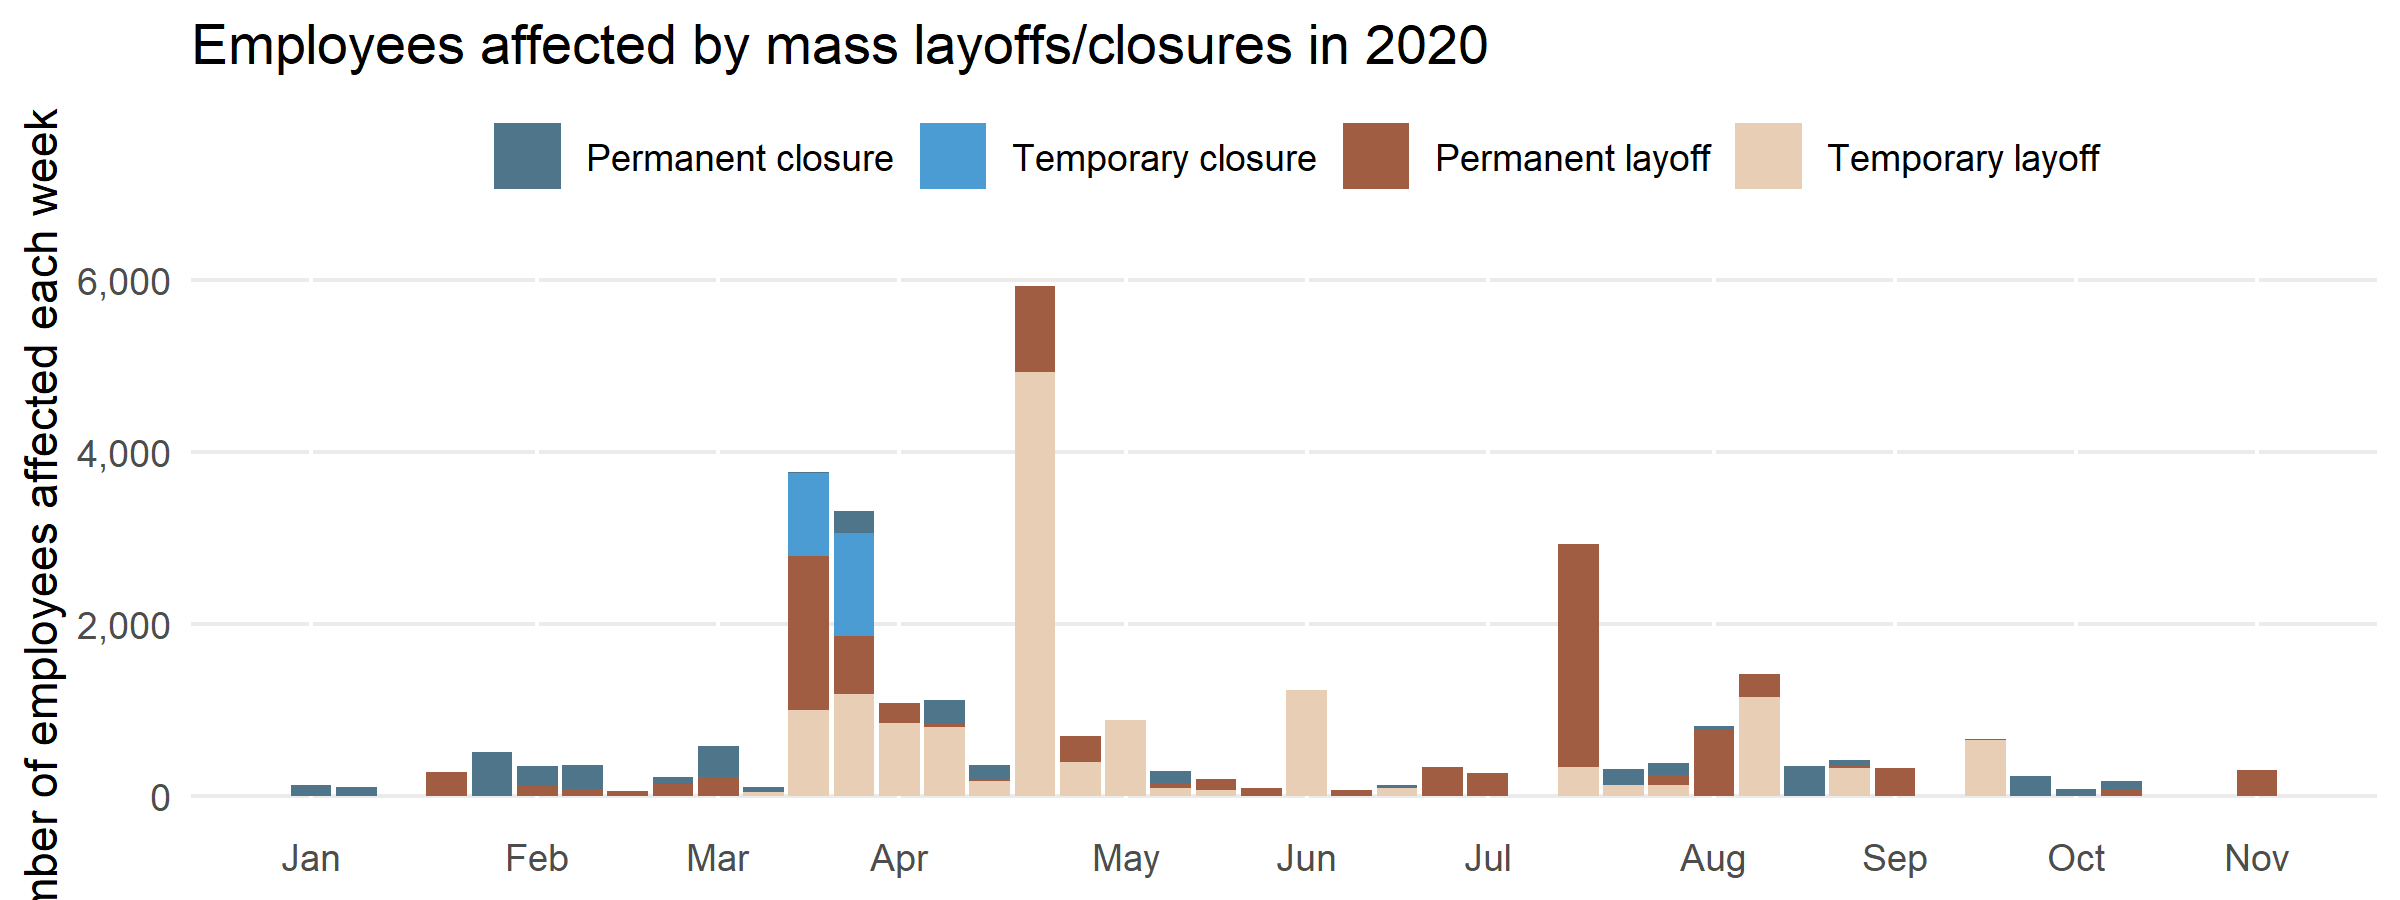 Figure 1: Employees affected by mass layoffs and closures in 2020